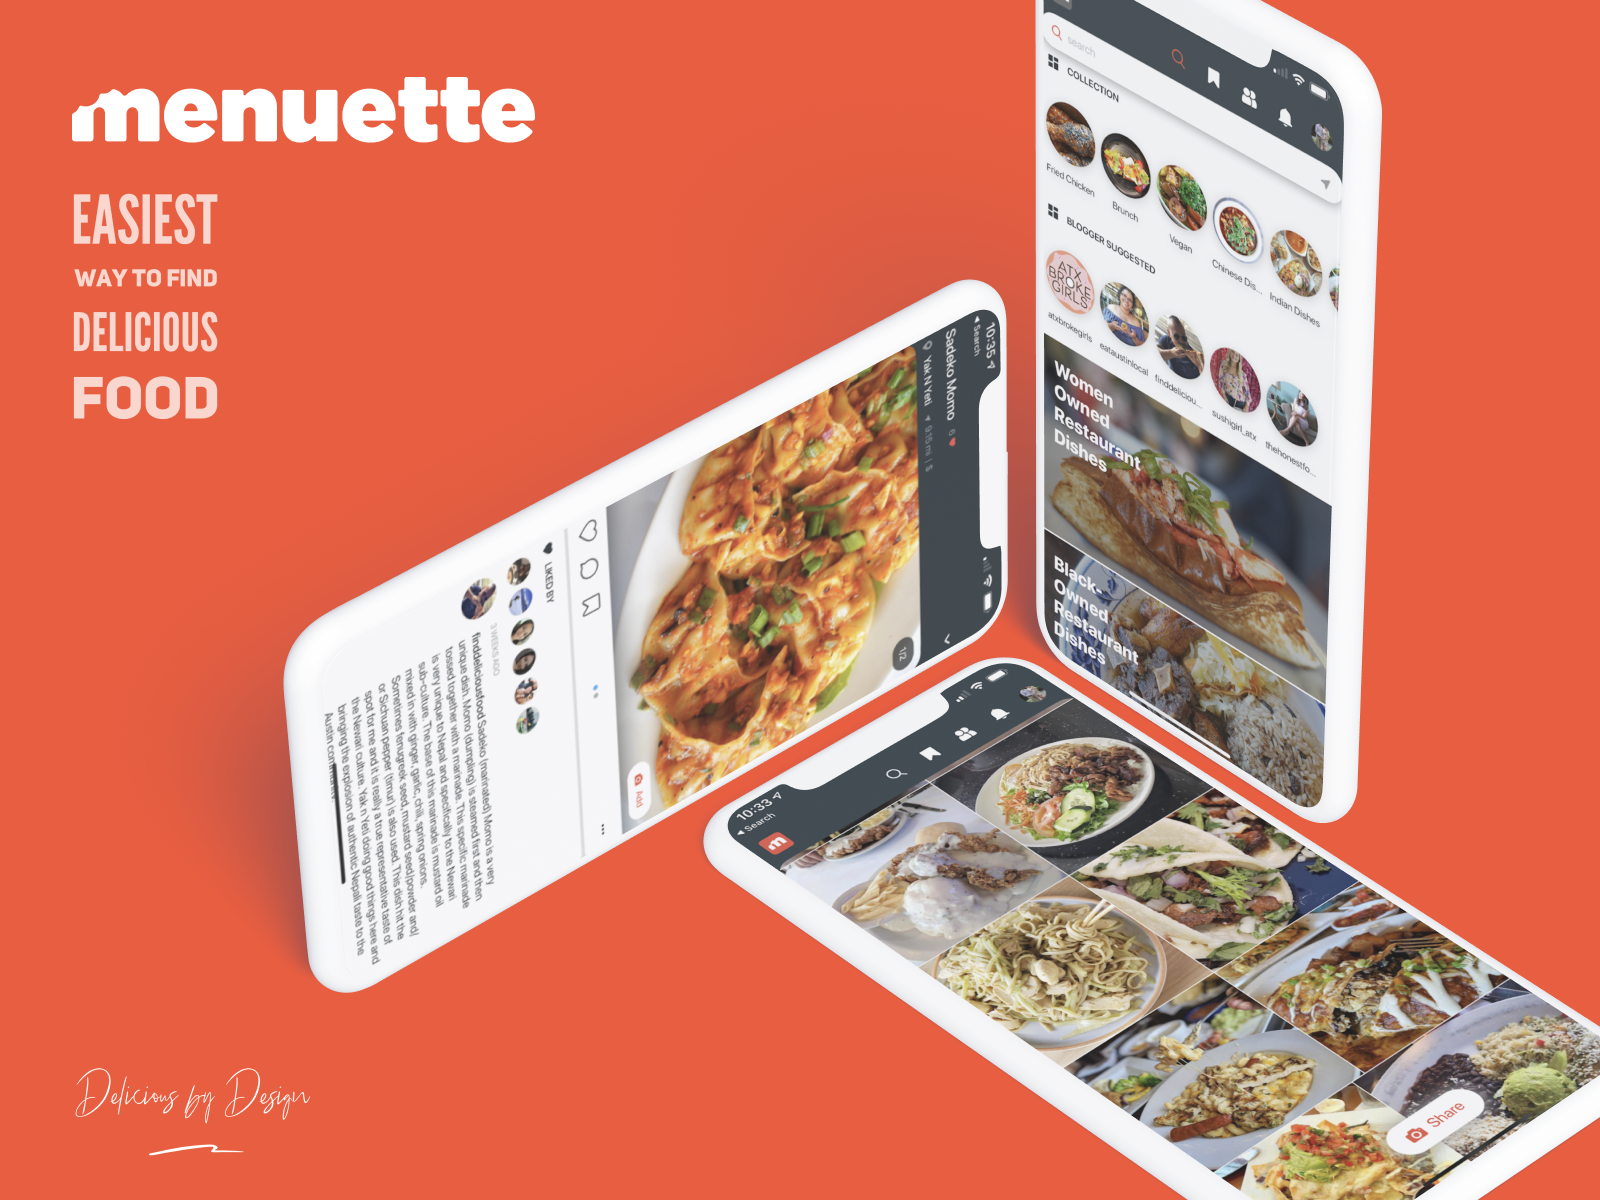 Shown is a preview of the mobile app Menuette